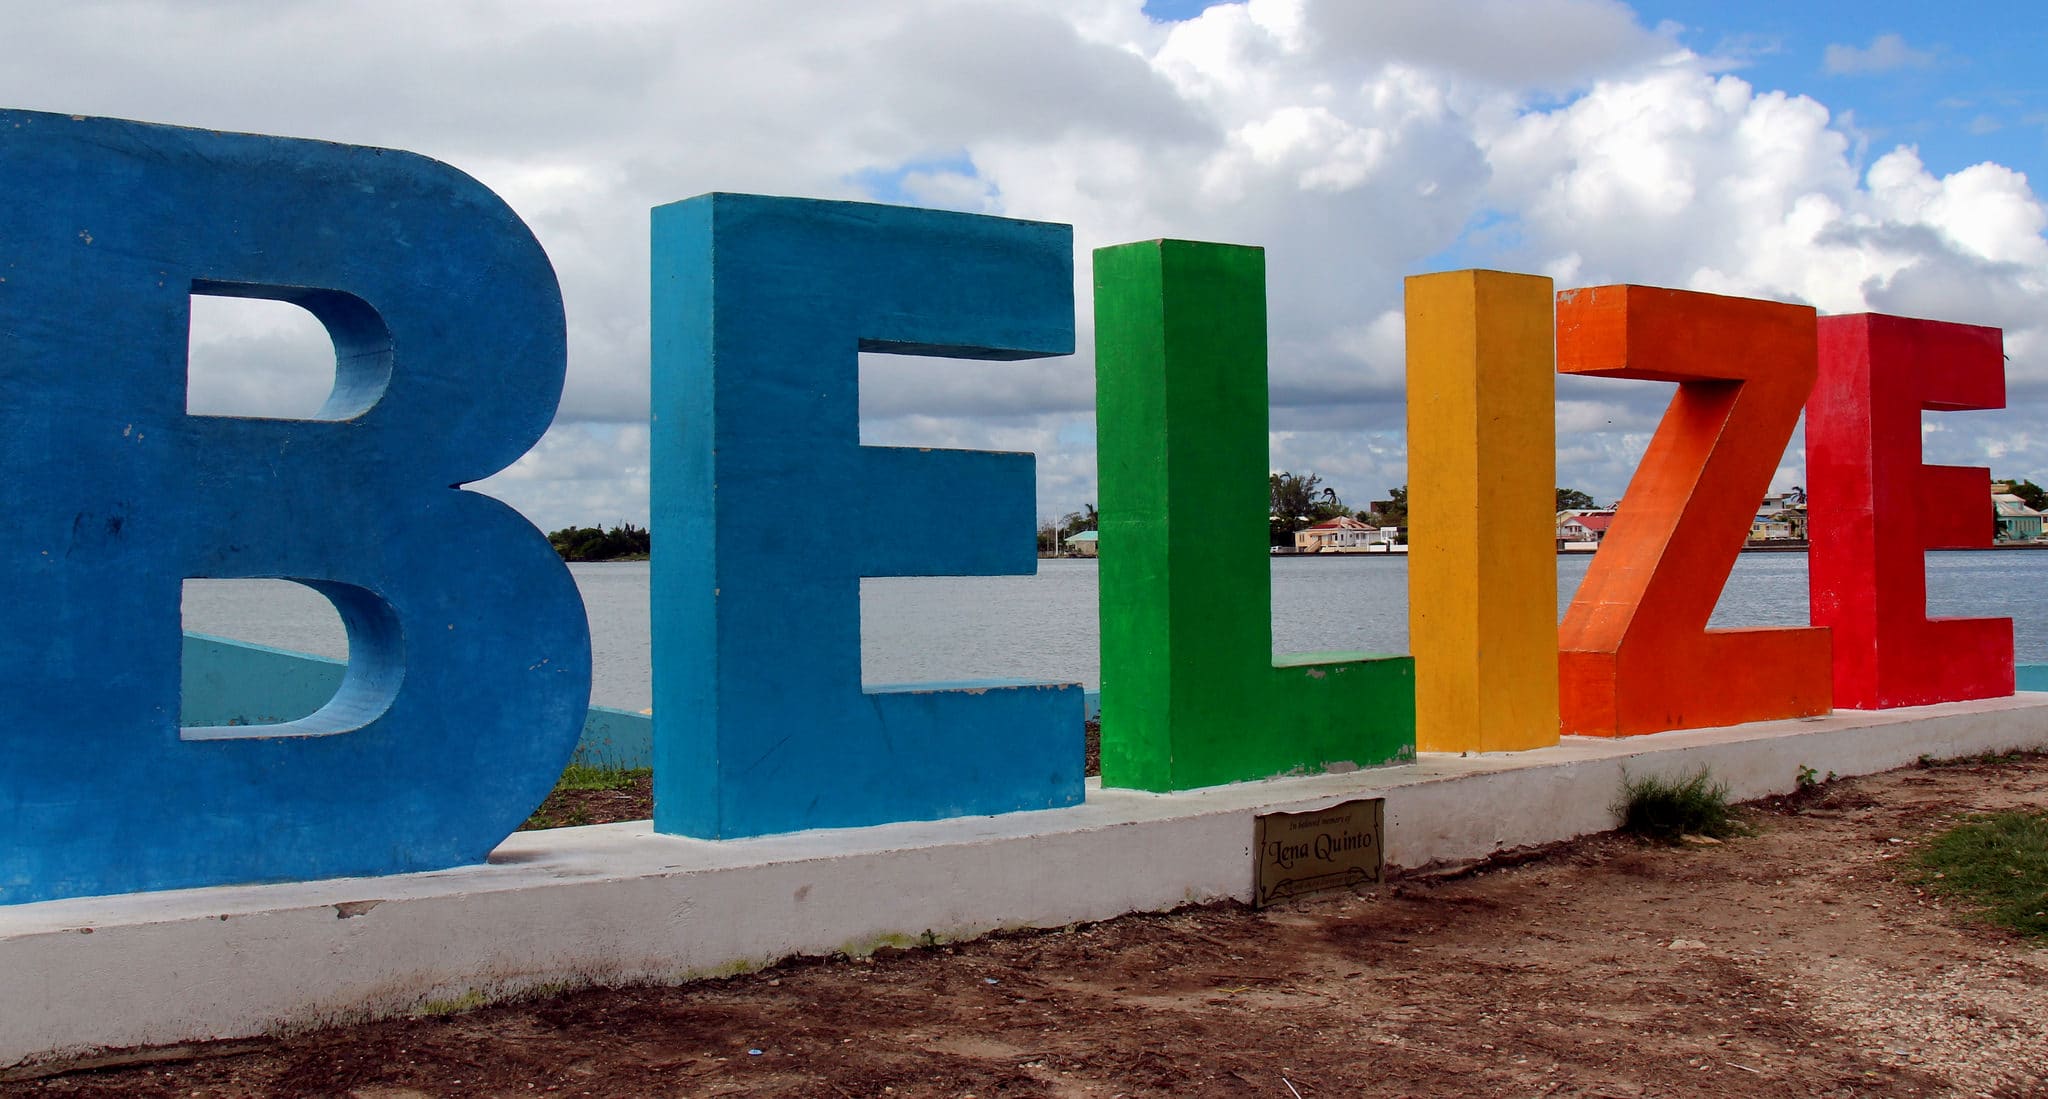 things to do in belize, what to do in belize, belize points of interest, belize things to do, best things to do in belize, top things to do in belize, things to do in belize city, belize attractions, where to go in belize, belize what to do, belize activities, must do in belize, what to see in belize, things to see in belize, belize must see, what is there to do in belize, top 10 things to do in belize, fun things to do in belize, what to do in belize city, best things to see in belize, belize blog, what can you do in belize, belize fun things to do, belize city things to do, belize things to do recommendations, belize city points of interest, top things to see in belize, what is there to see in belize, what to visit in belize, cool things to do in belize, top ten belize, things to do in belize in january, best plaees to go in belize, belize mexico things to do, what to do in belize city for a day, belize things to see, to do in belize city, top ten things to do in belize, best destinations in belize, belize points of interest, belize travel blog, belize what to do, fun things in belize, what is there to do in belize, belize blog